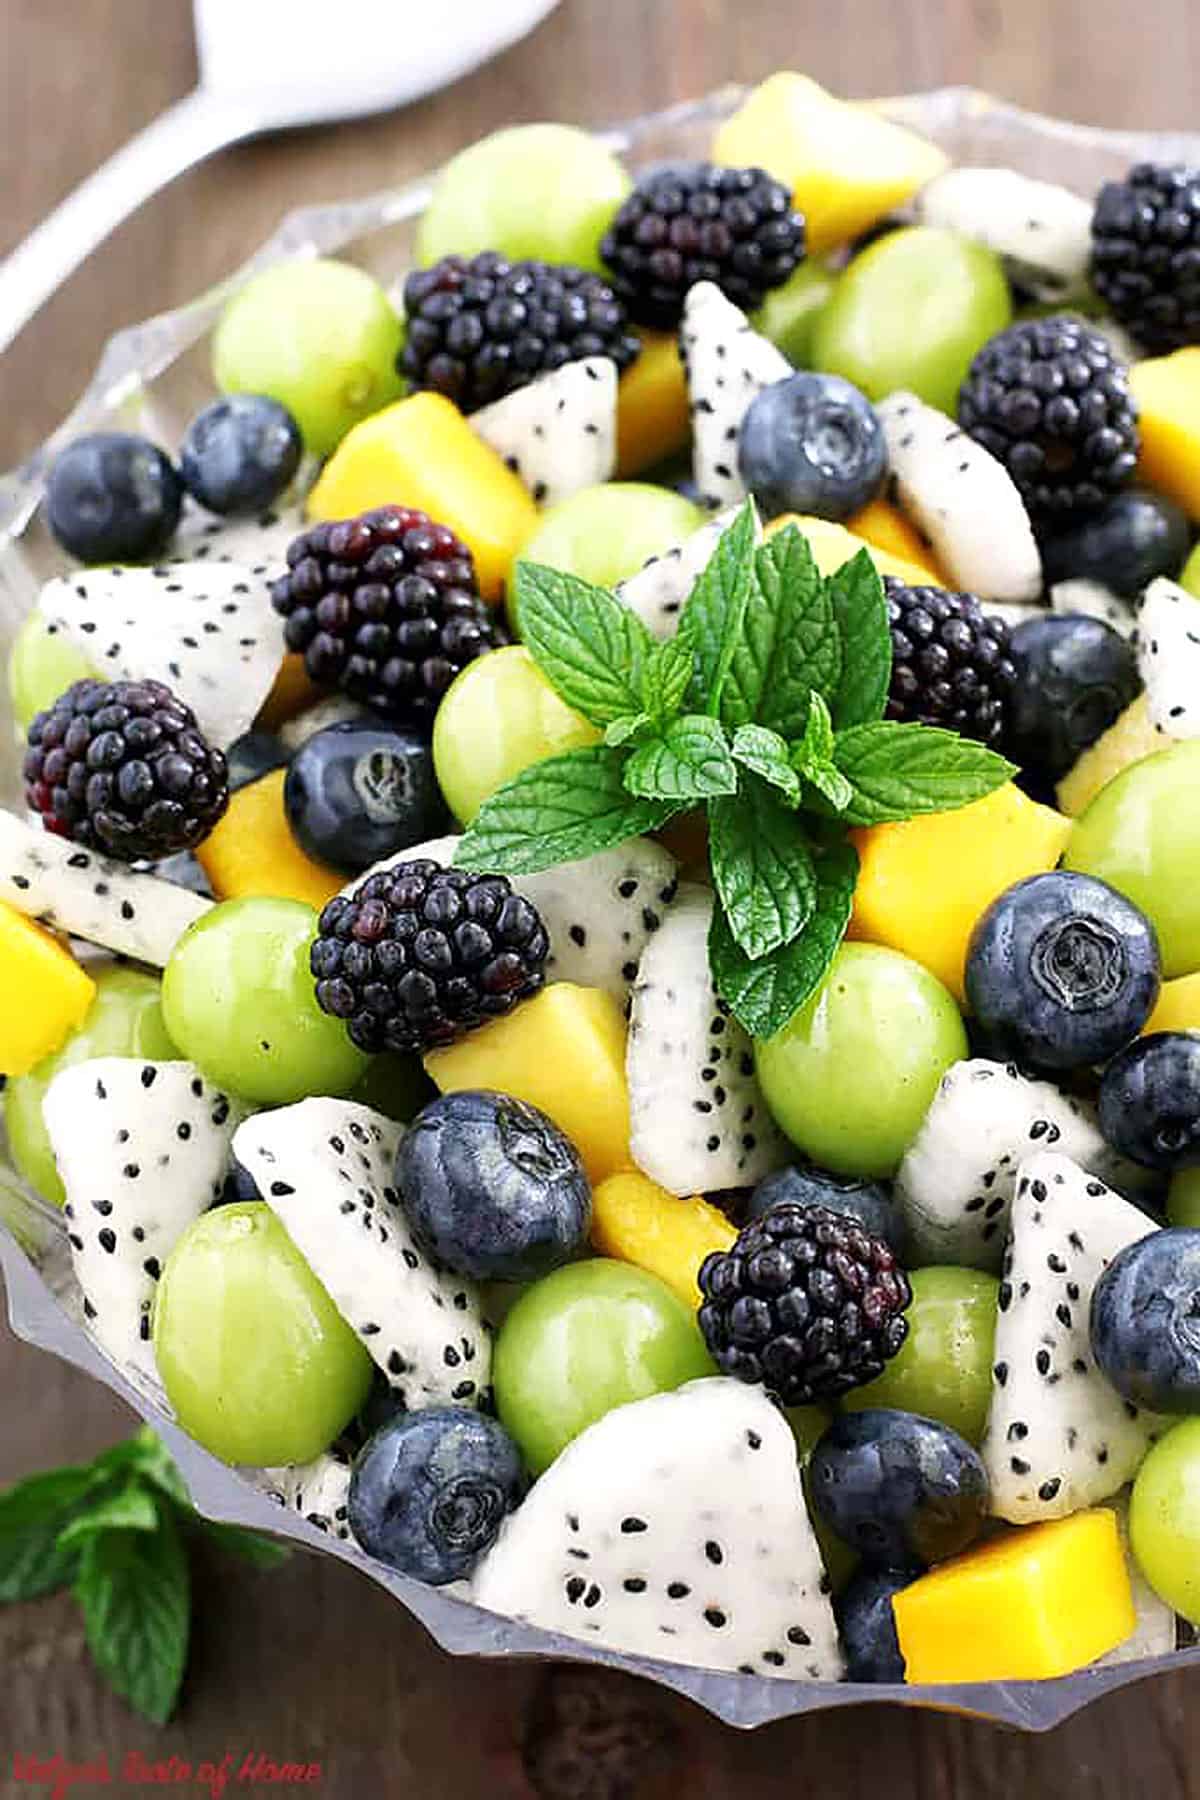 This fruit salad is called summer fruit salad, but it may be made all year. If you don't like any of the fruits included in this recipe, you can always change them out for what's in season or what you have on hand!